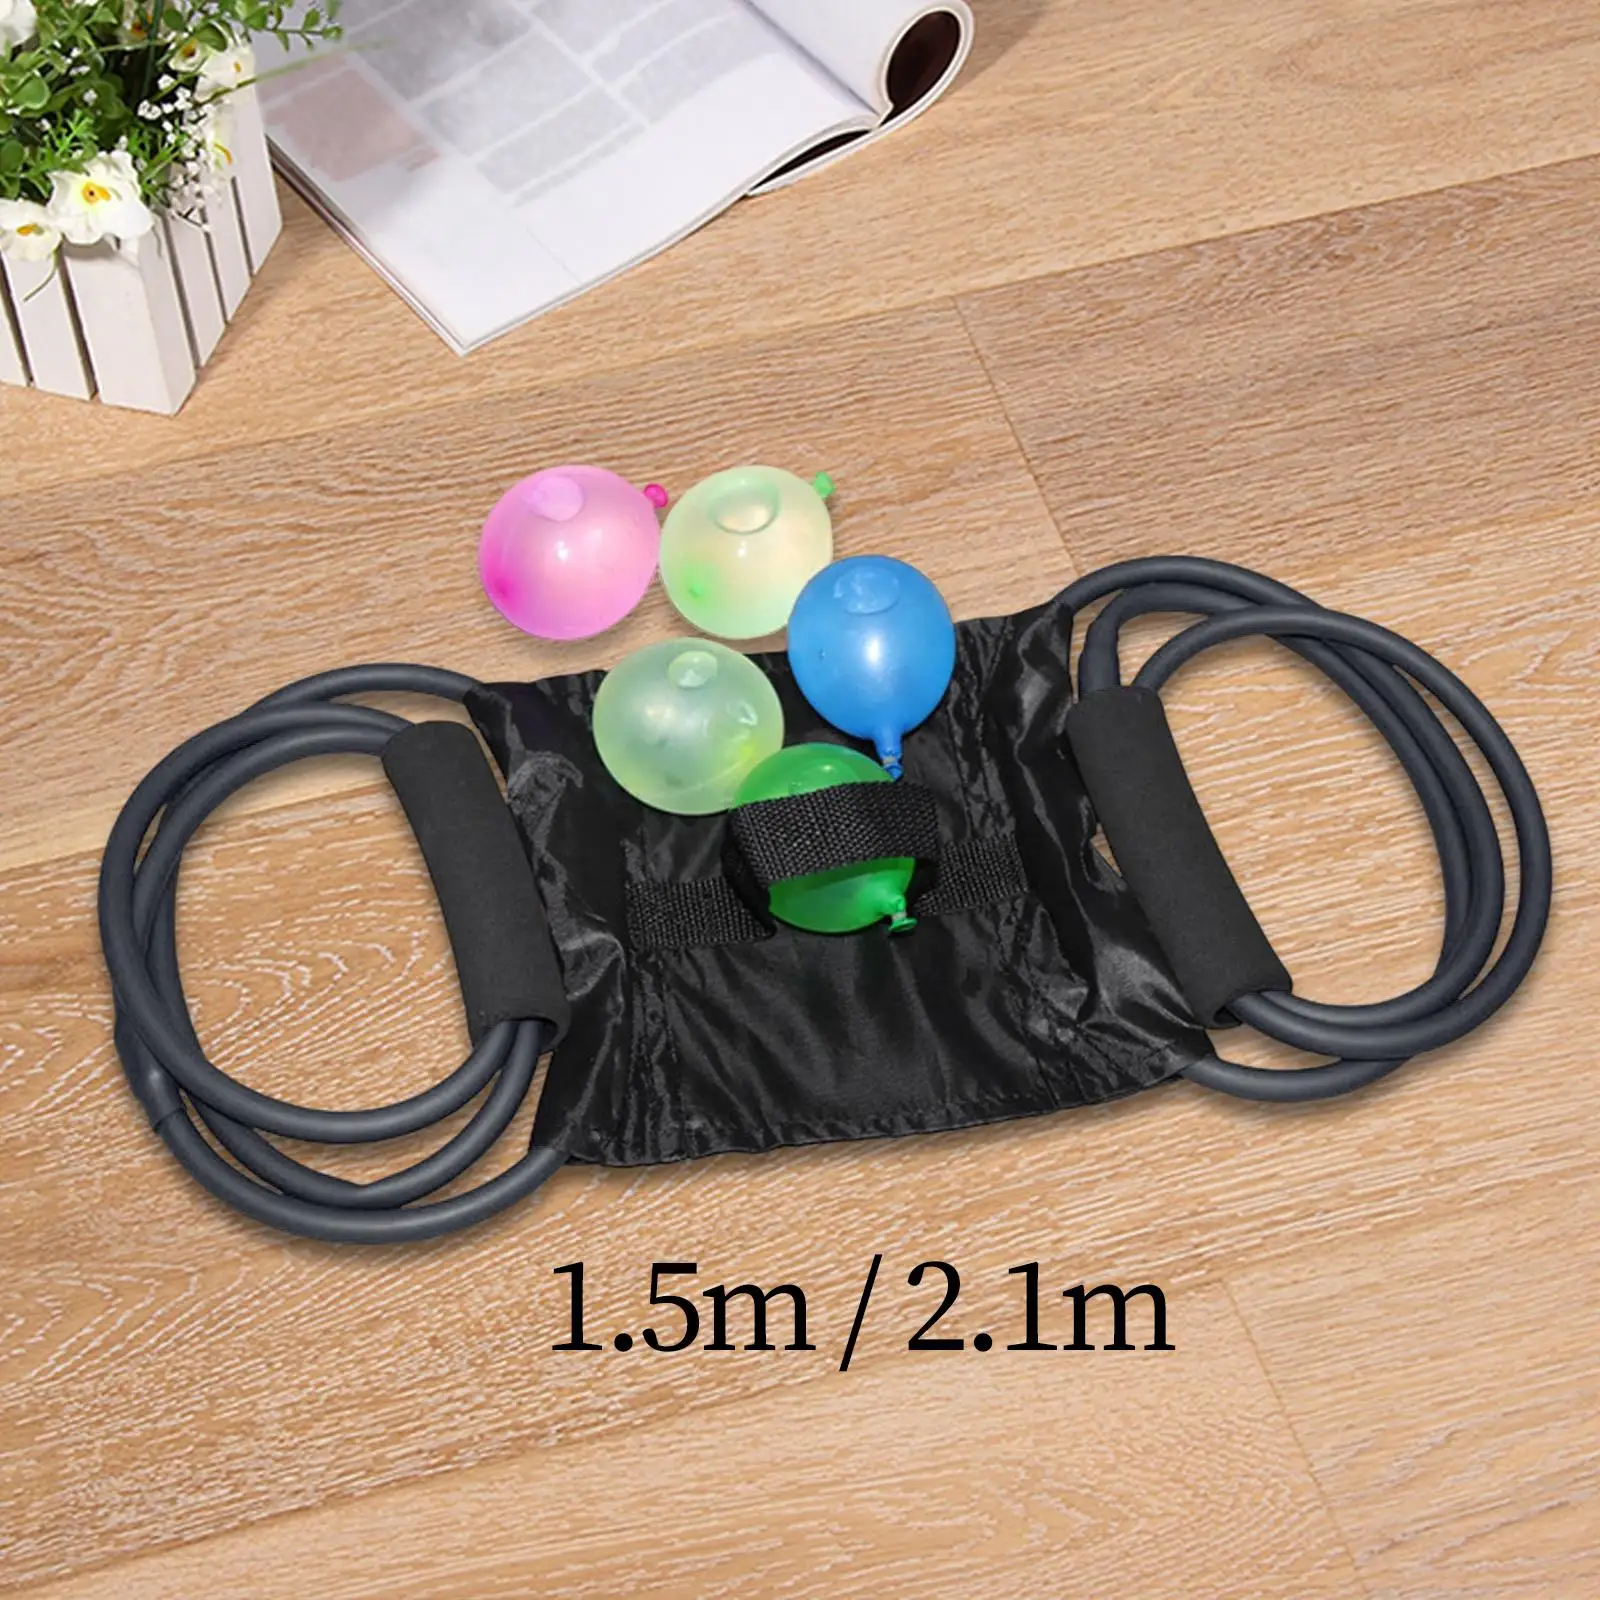 Water Balloon Launcher Balloon Catapult Snowball Launcher Water Toy 3 Men Slingshots for Family Kids Reunions Swimming Pool